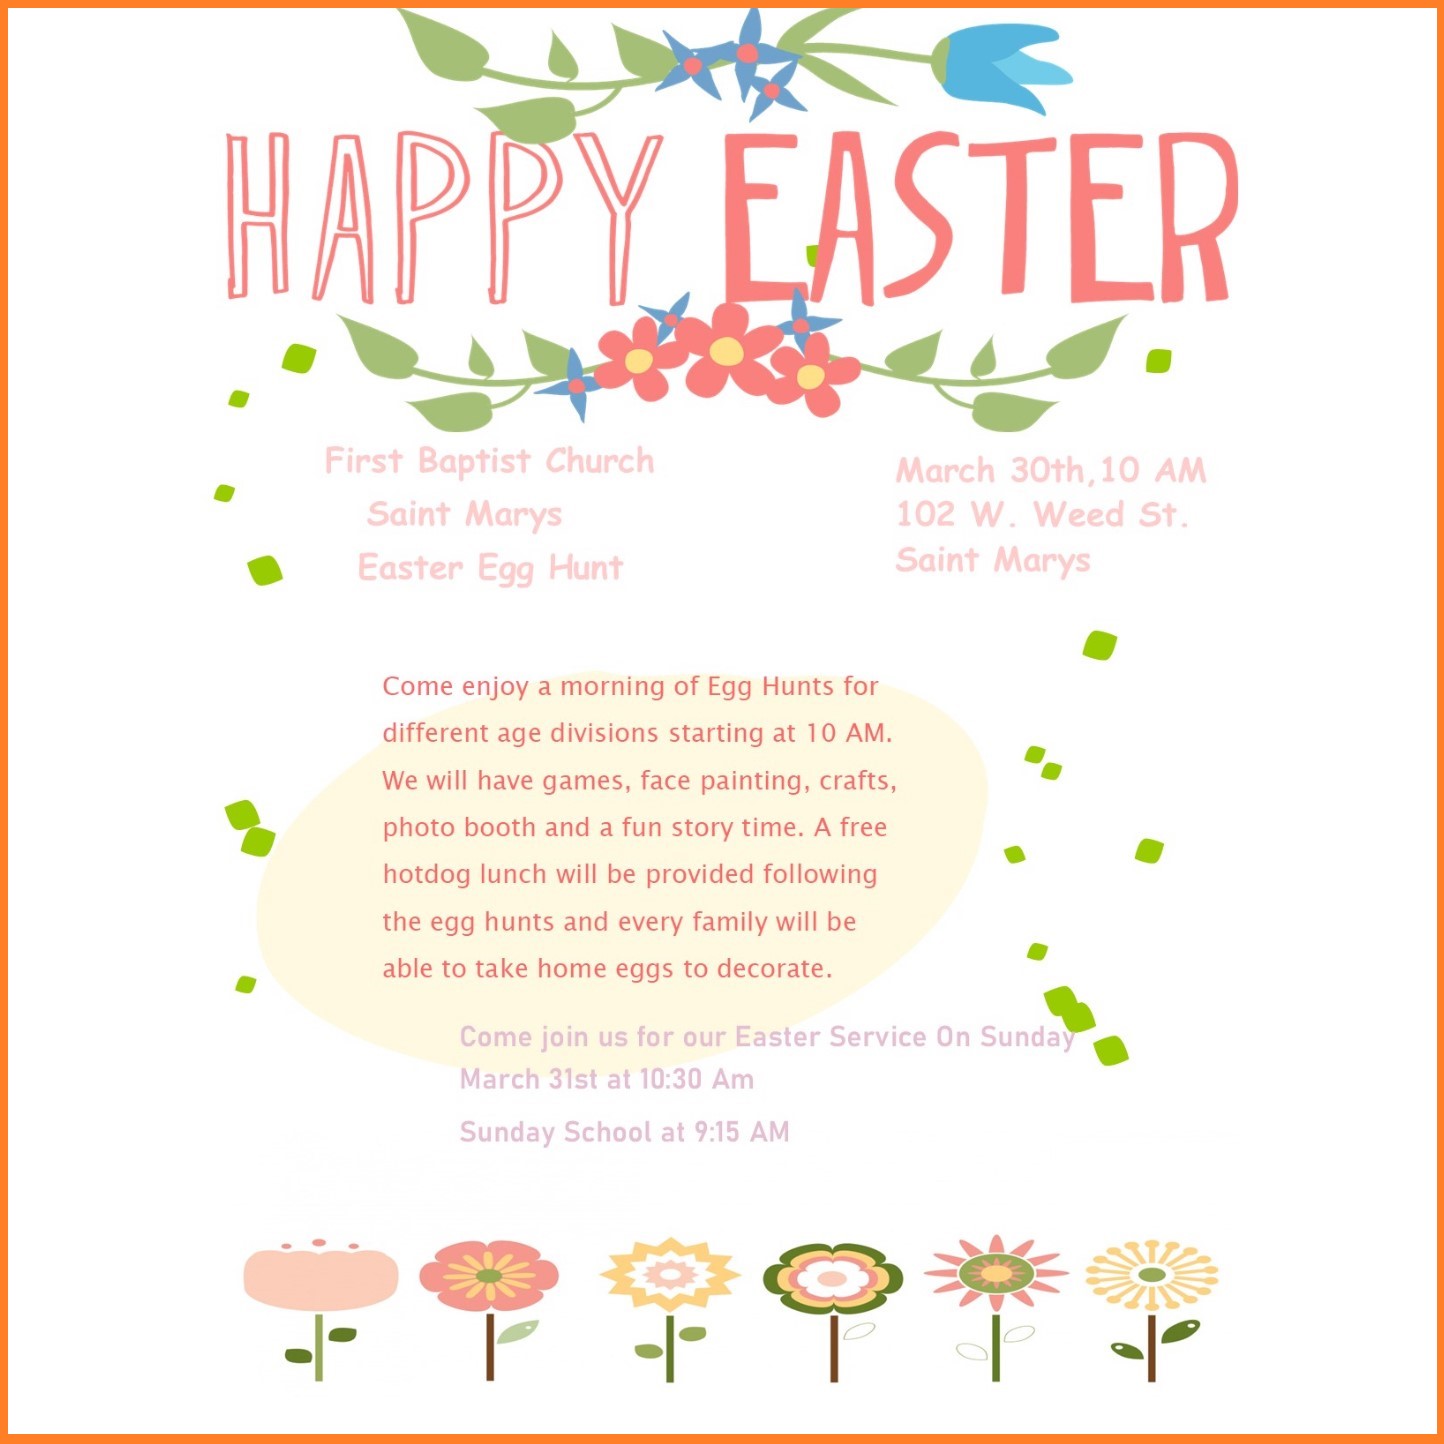 Children's Easter Egg Hunt and More!  Saturday, March 30th, 10:00 AM